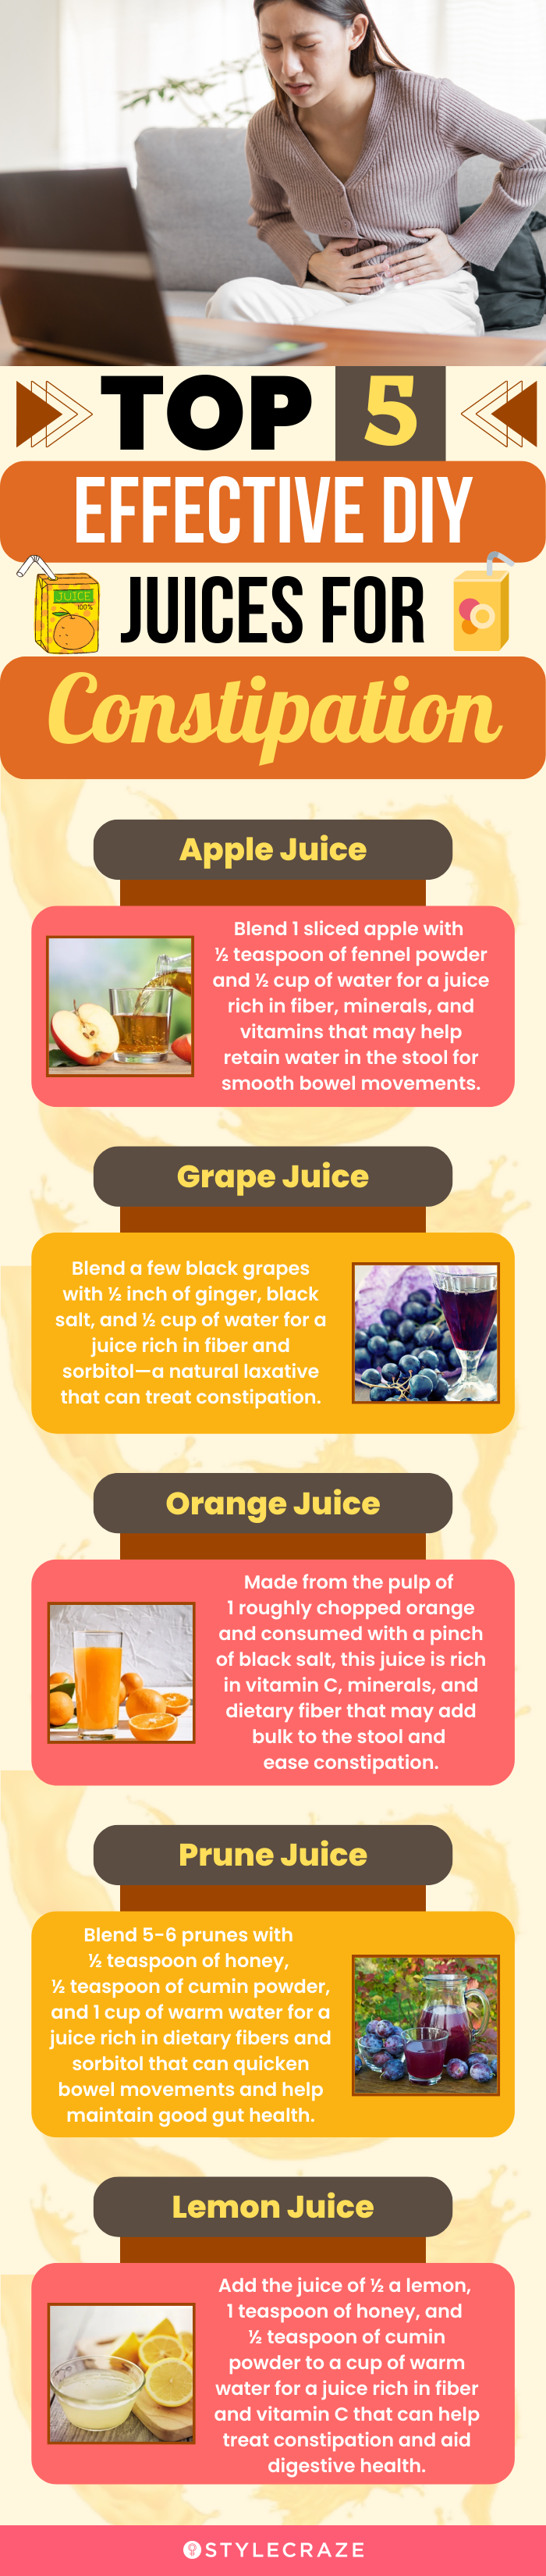 top 5 effective diy juices for constipation (infographic)